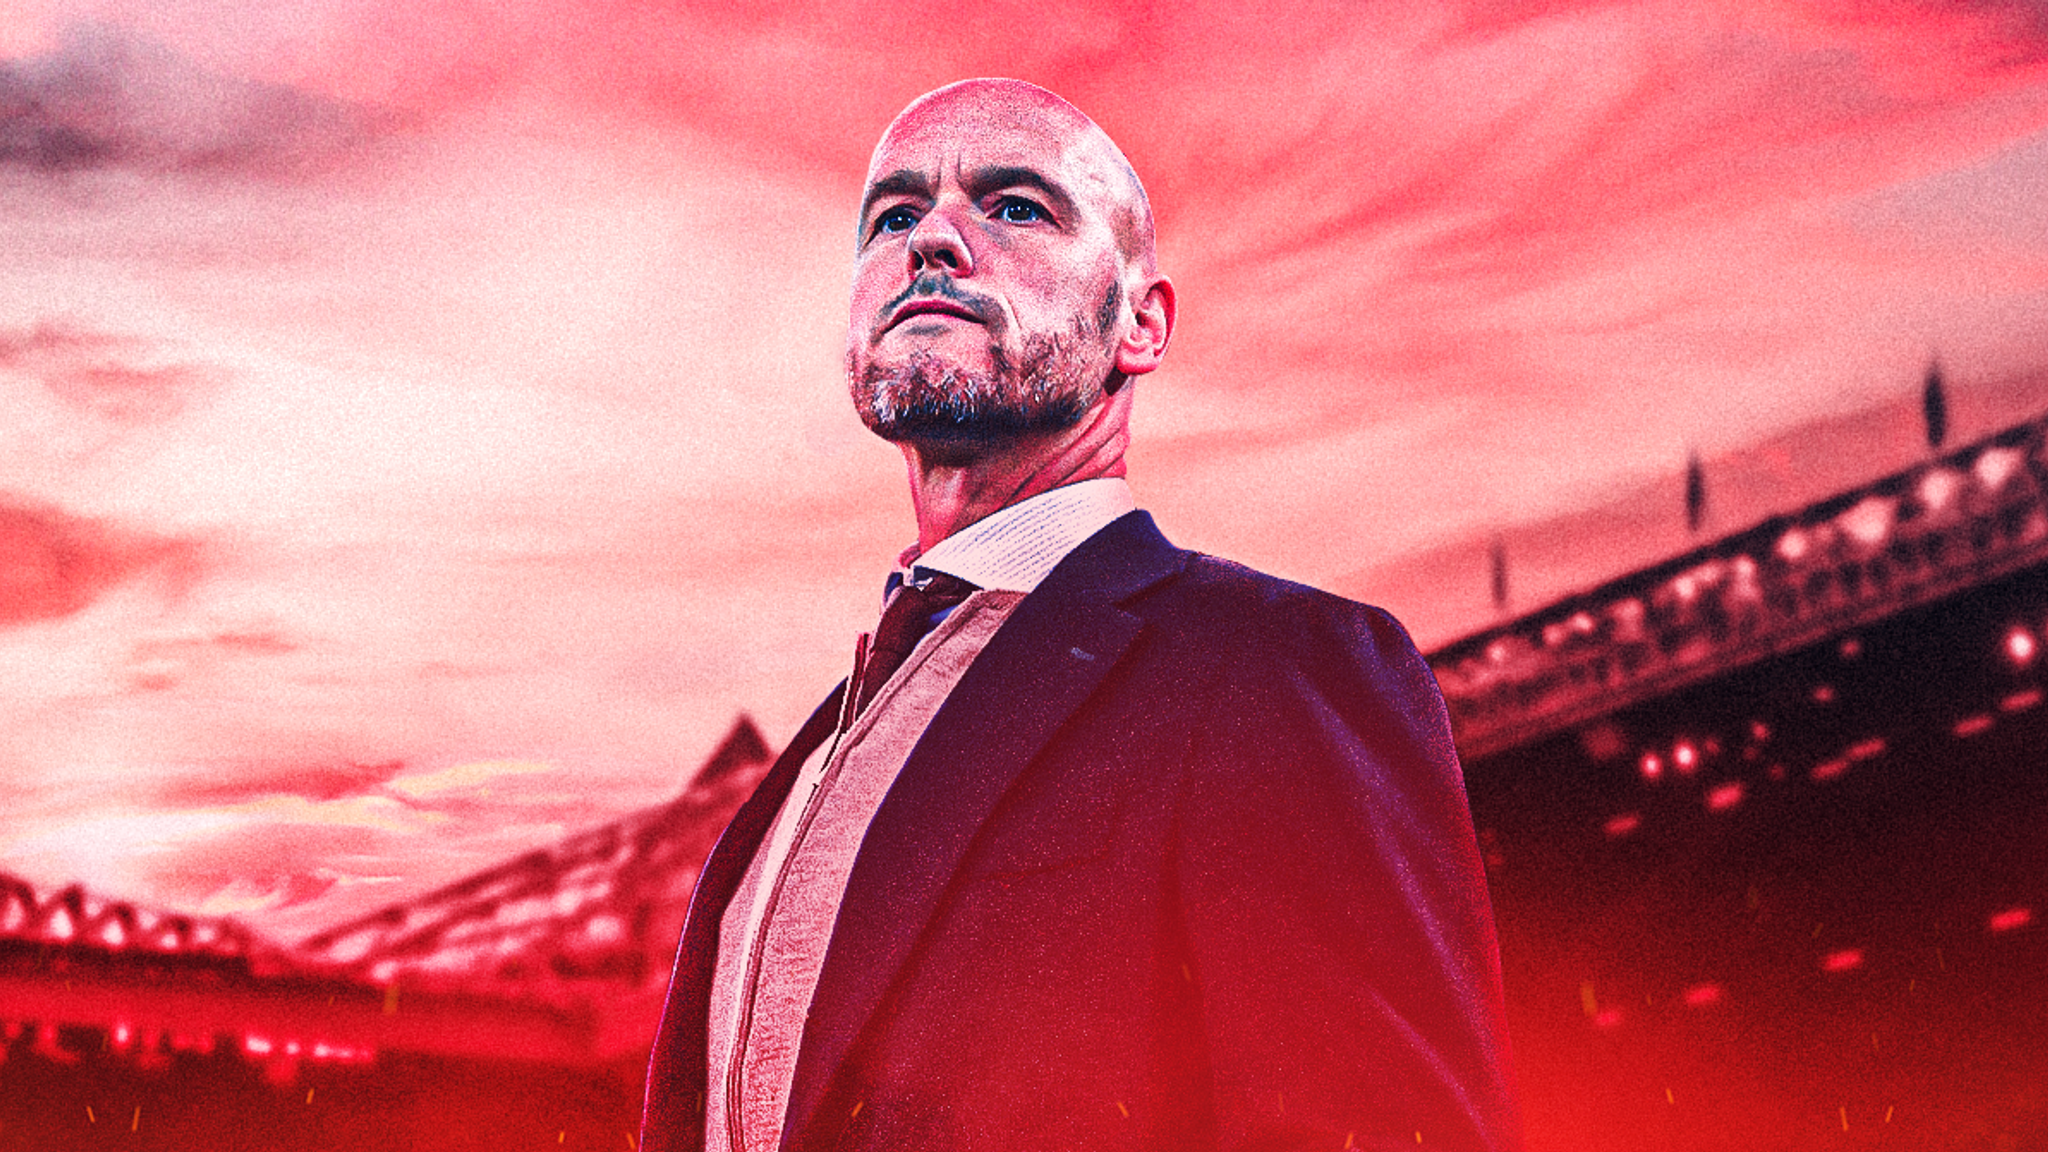 Erik ten Hag at Manchester United: How much time will new manager need to be a success in Premier League?